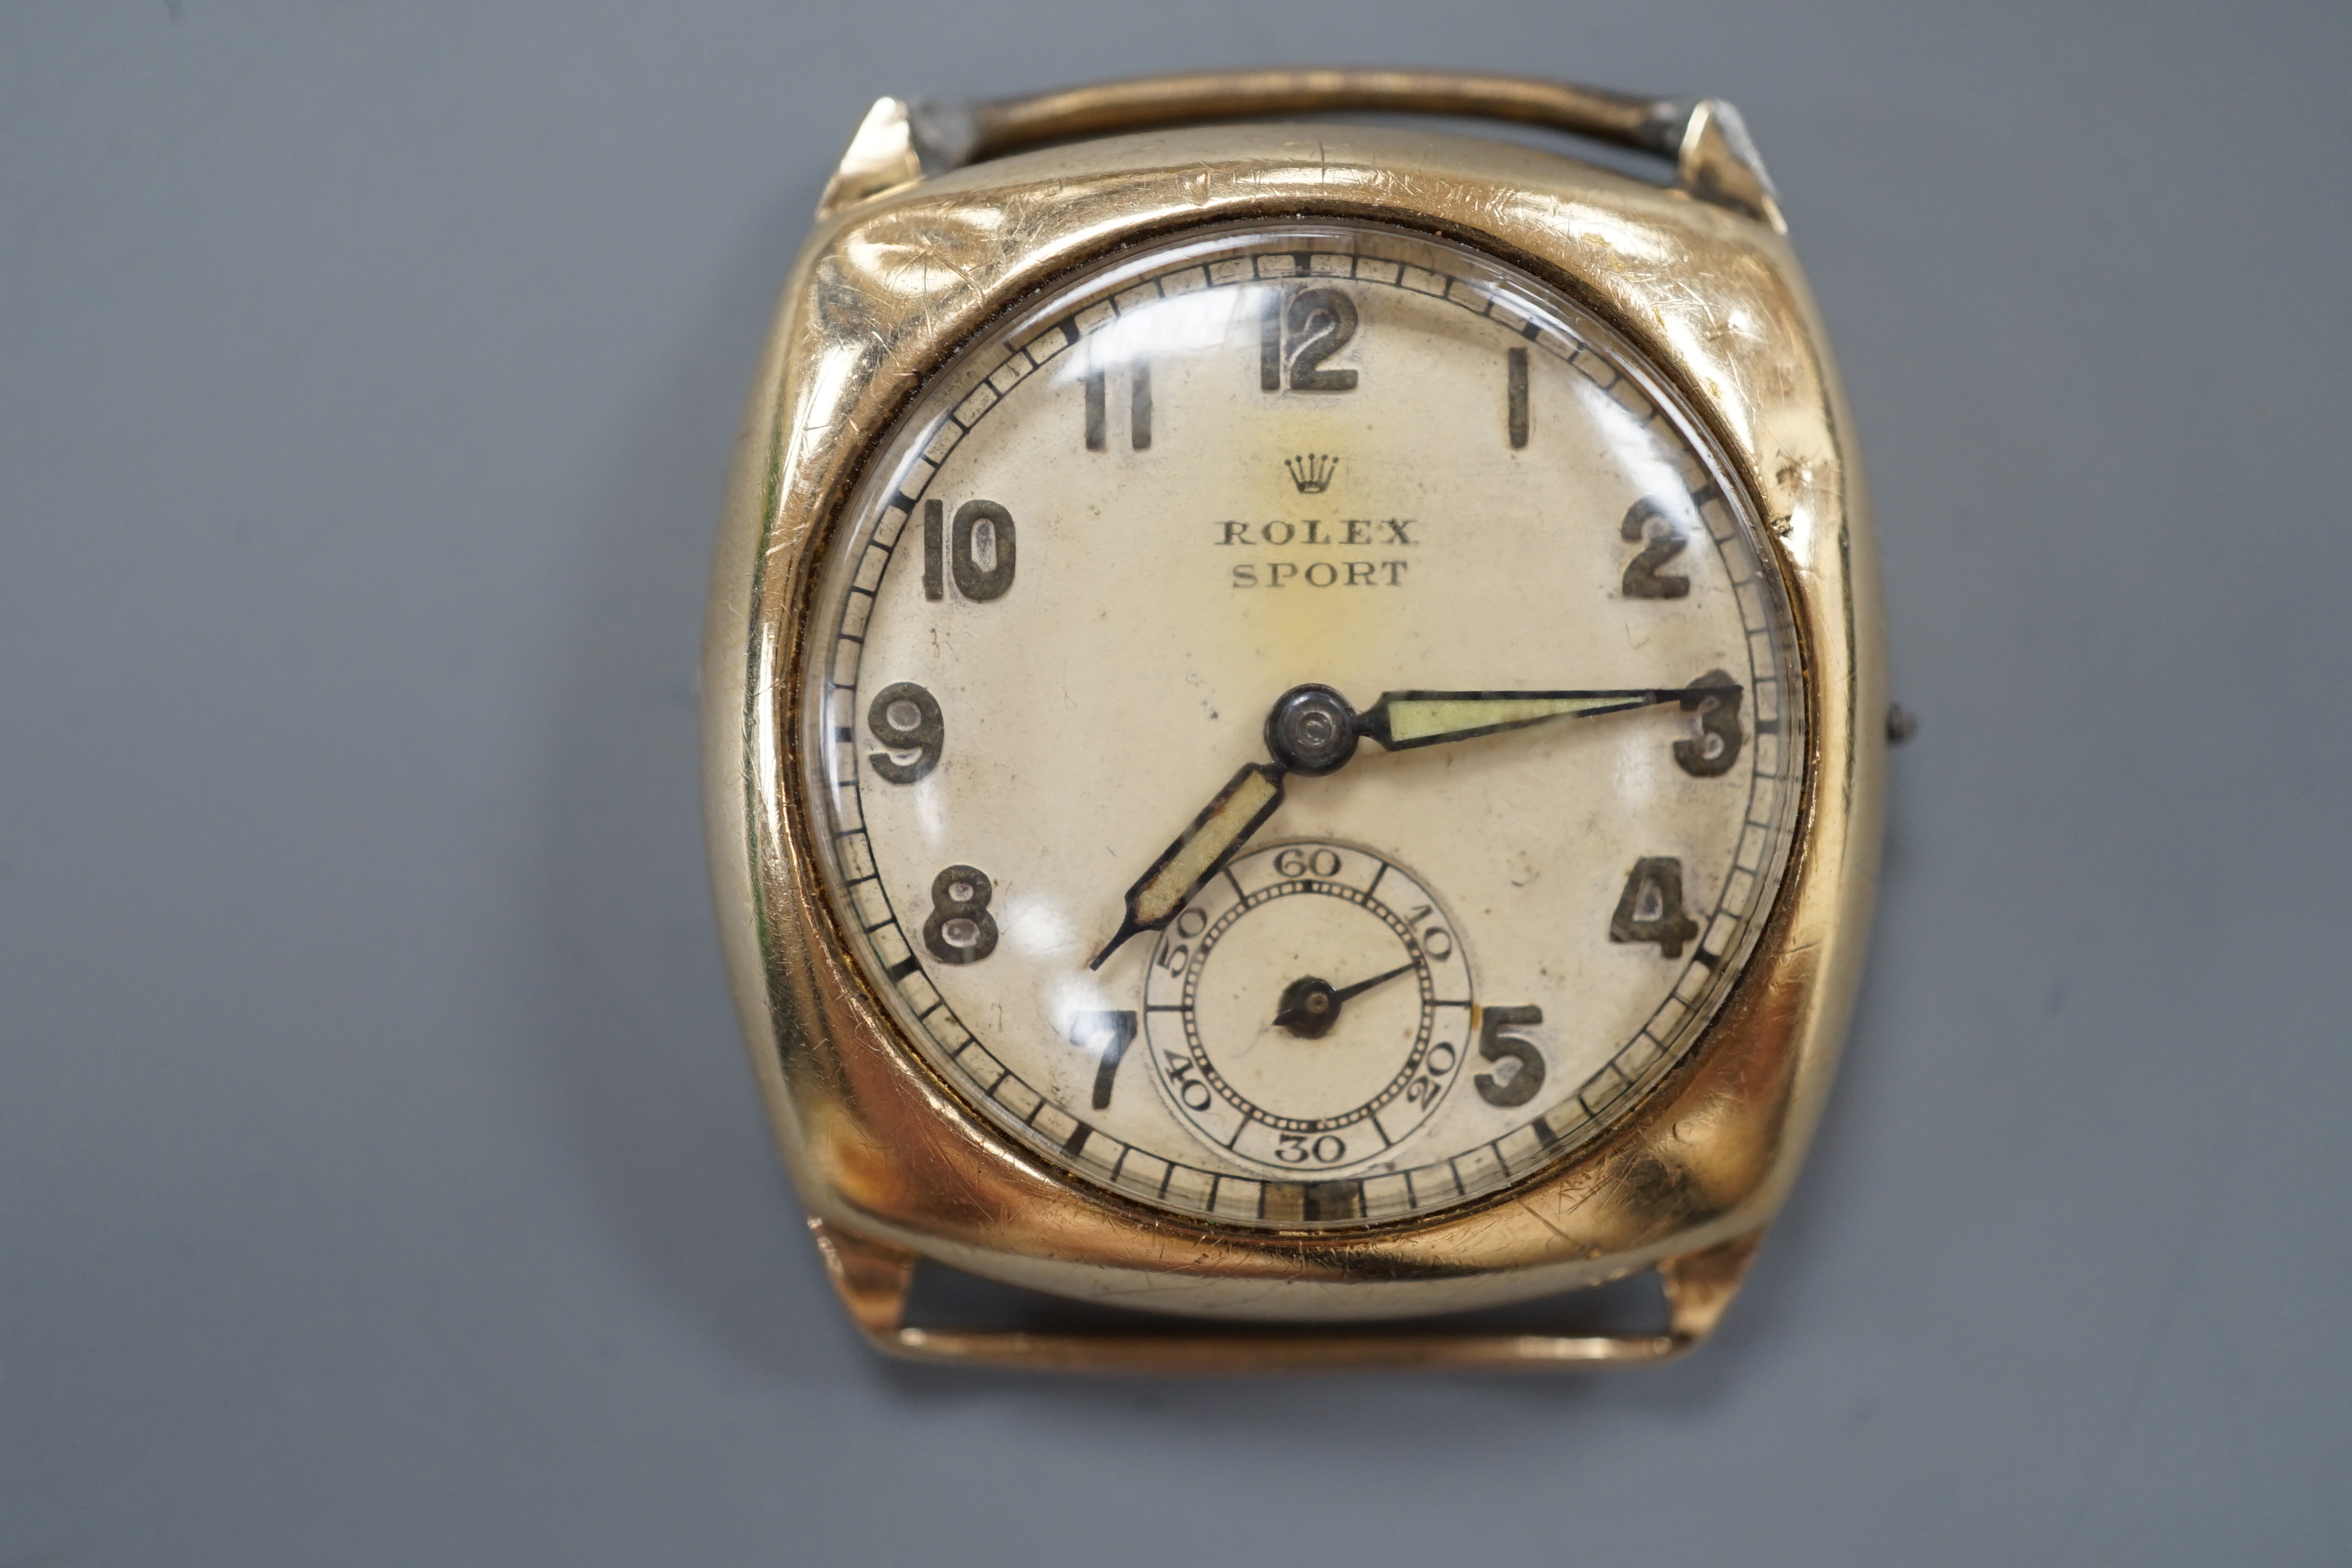 A gentleman's 1940's 9ct gold Rolex Sport manual wind wrist watch, with Arabic dial and subsidiary seconds, case diameter 30mm, lacking winding crown and strap, gross weight 16.7 grams.